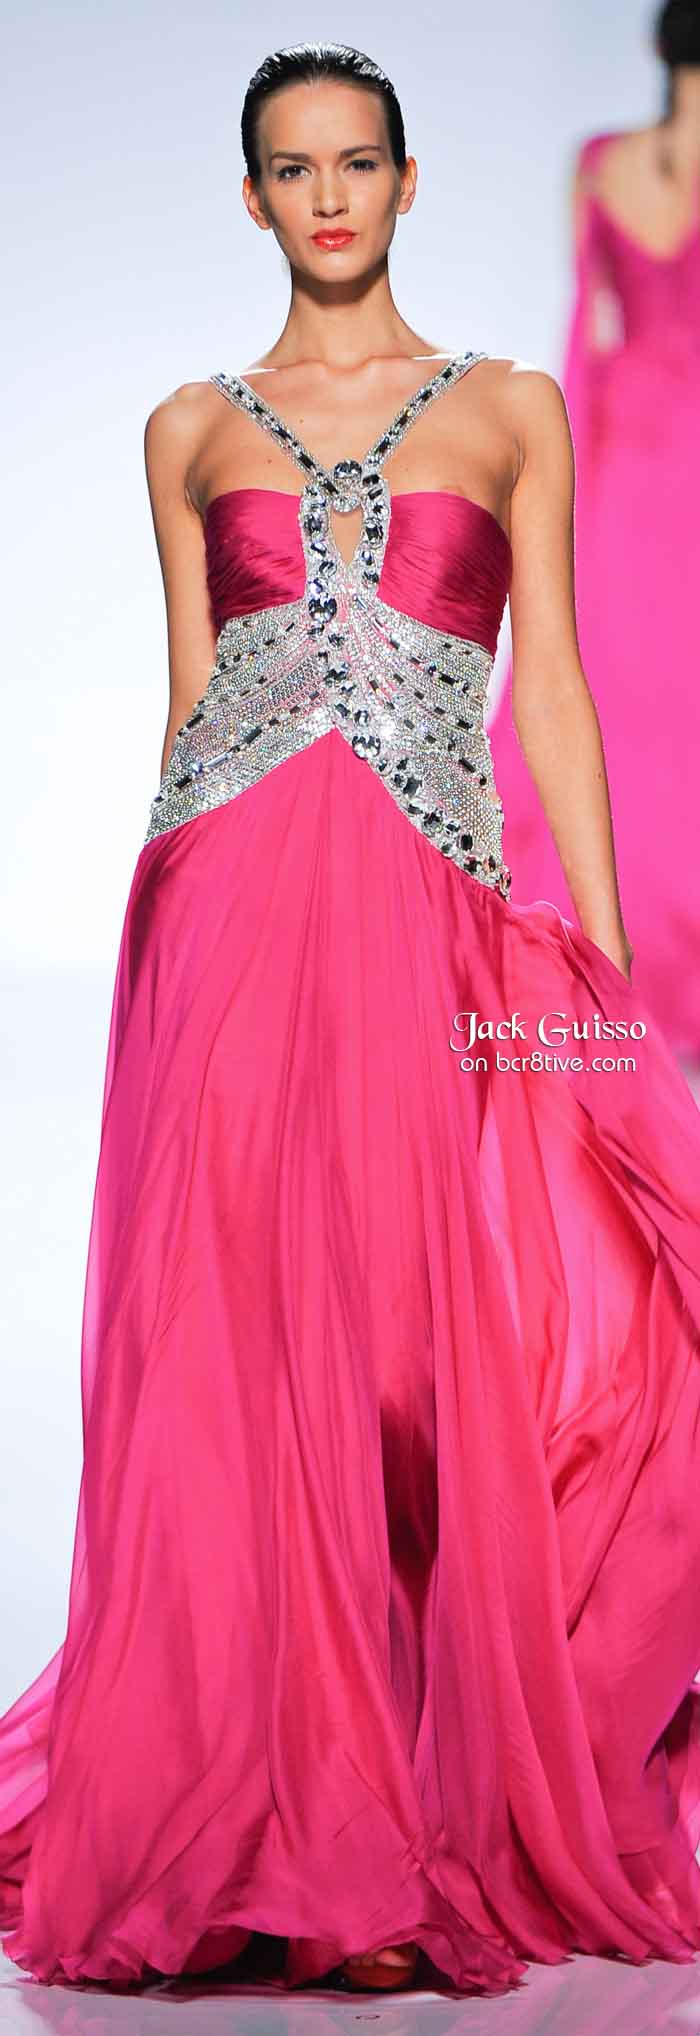 Jack Guisso Spring 2011 Couture – Be Creative